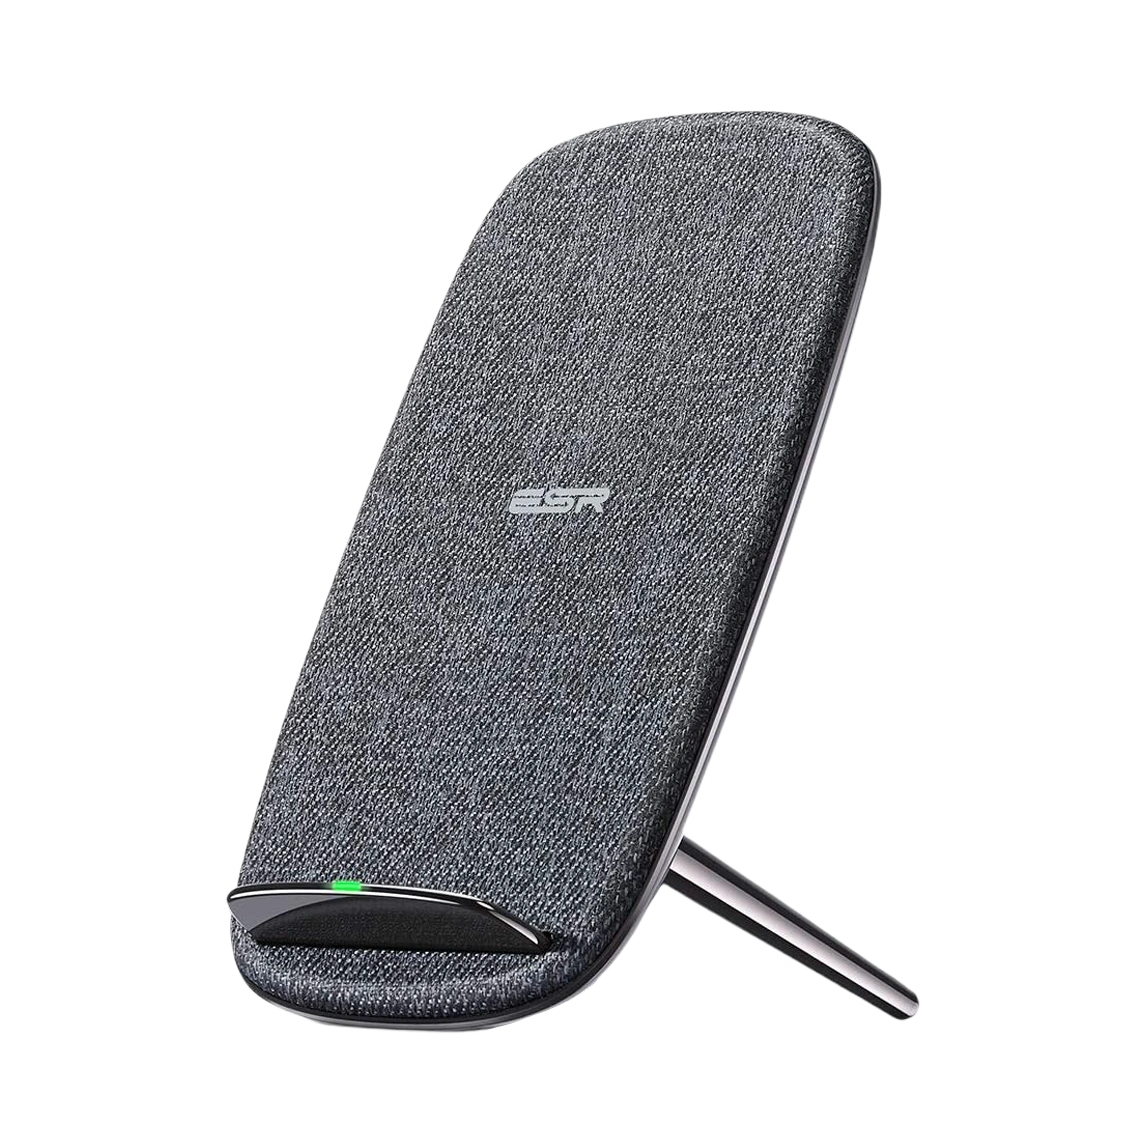 esr-lounge-stand-wireless-charger